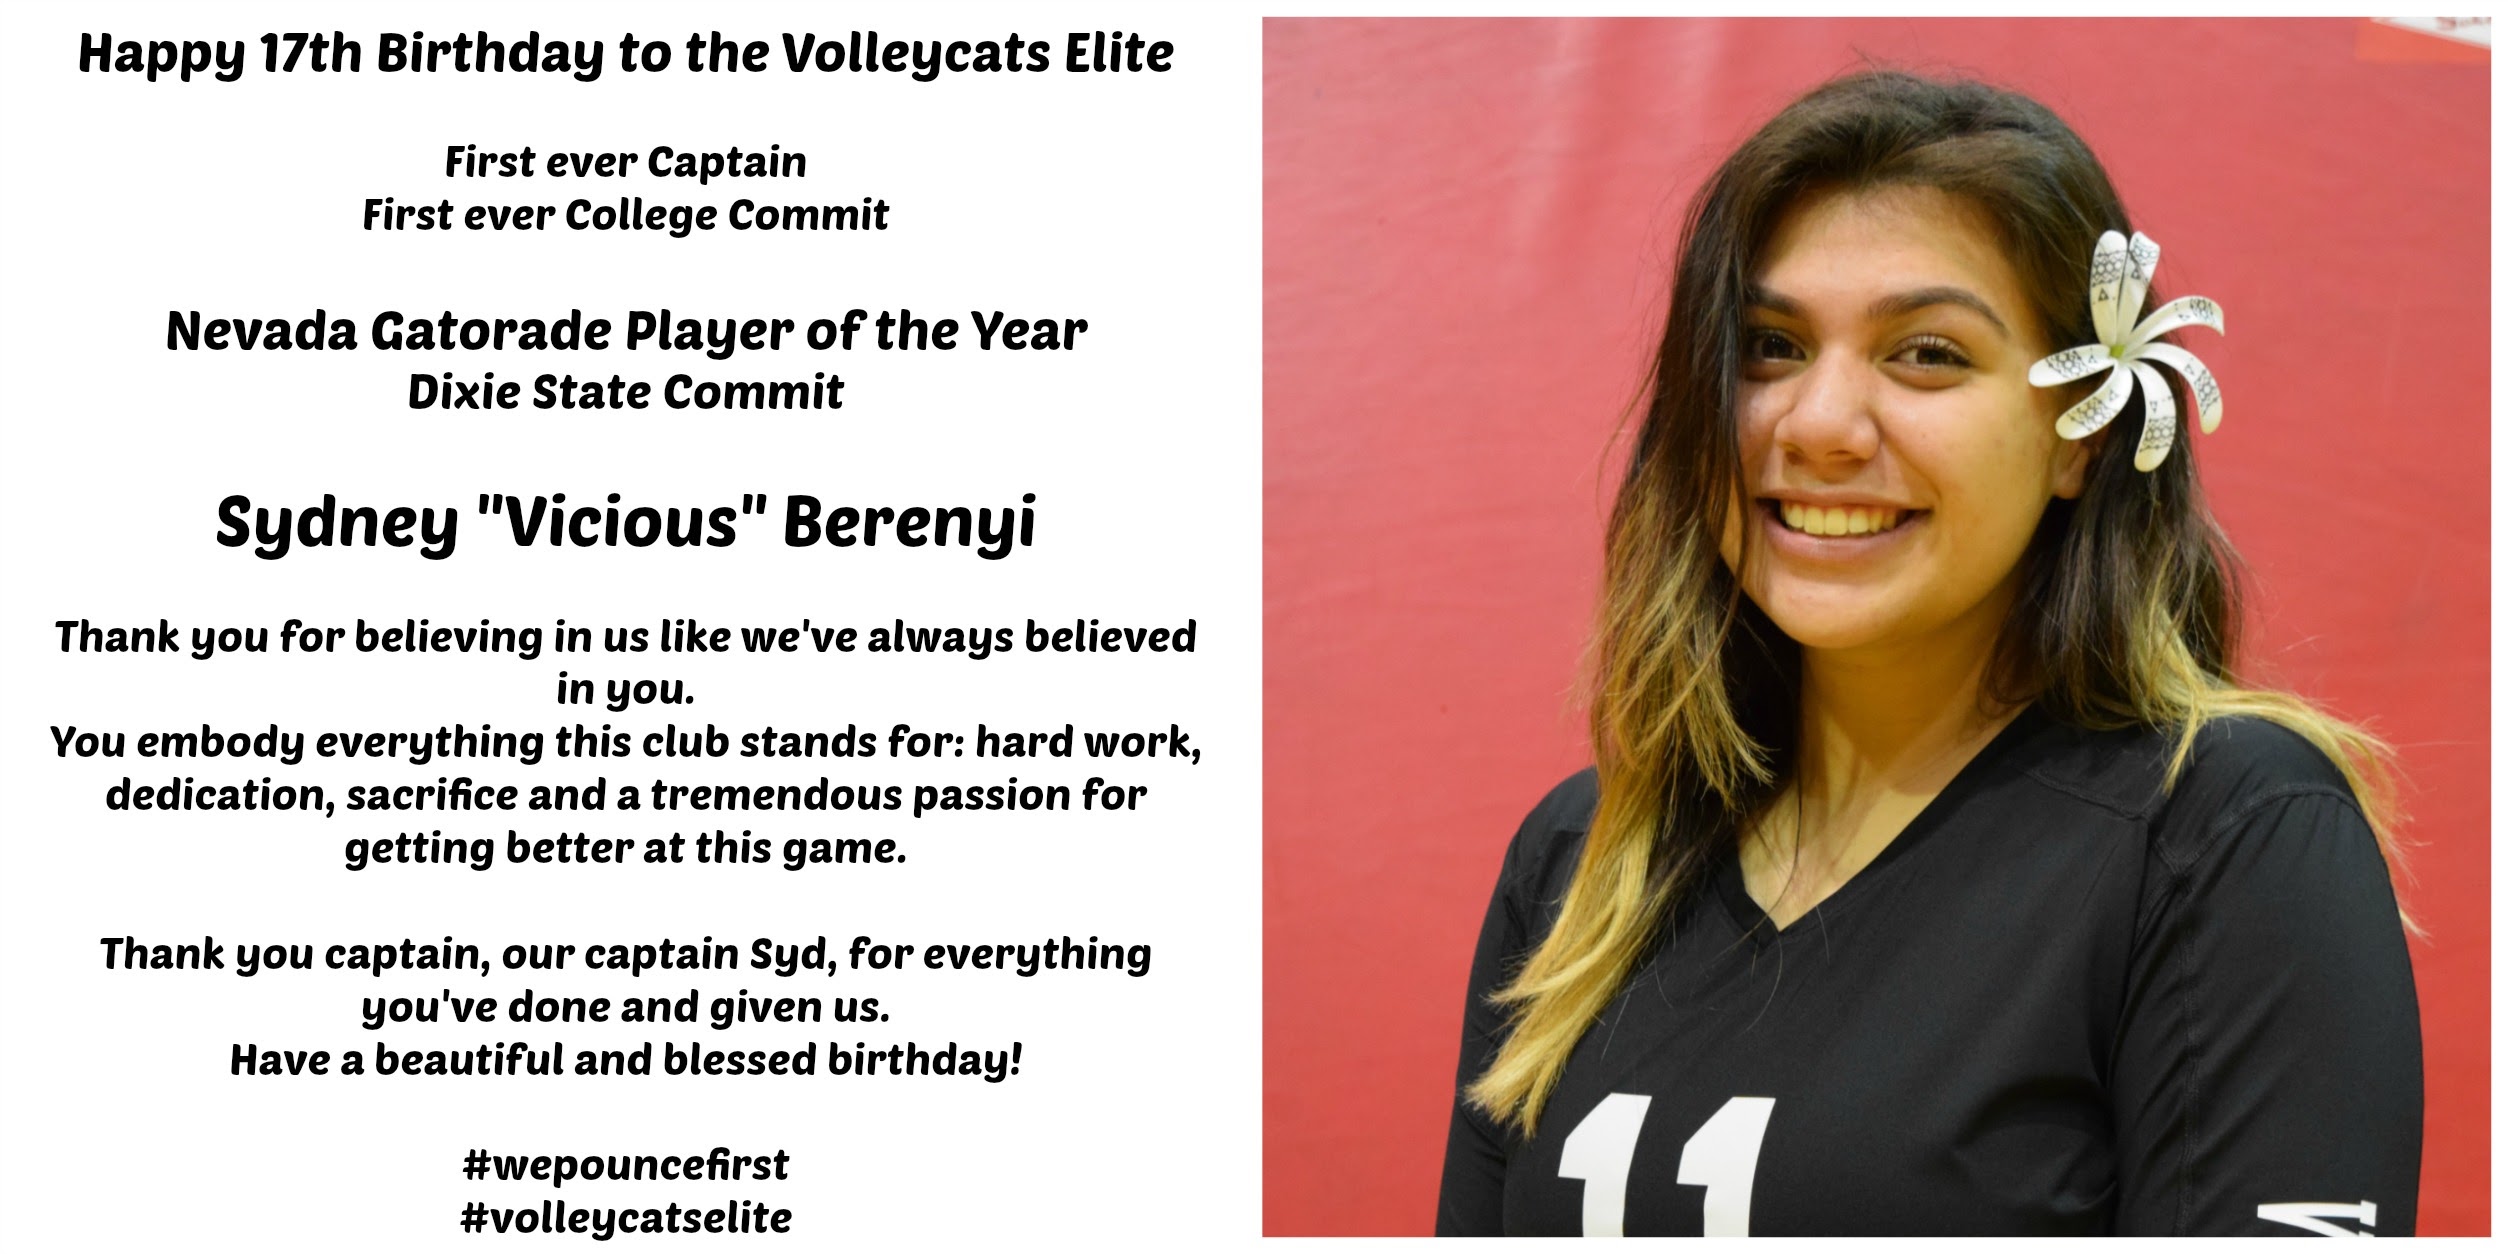 Congratulations to Junior now Senior, Volleycats Elite VBC Cougars 17s Elite

2016-2017 Nevada Gatorade Player of the Year
Nevada Preps Female Volleyball Player of the Year